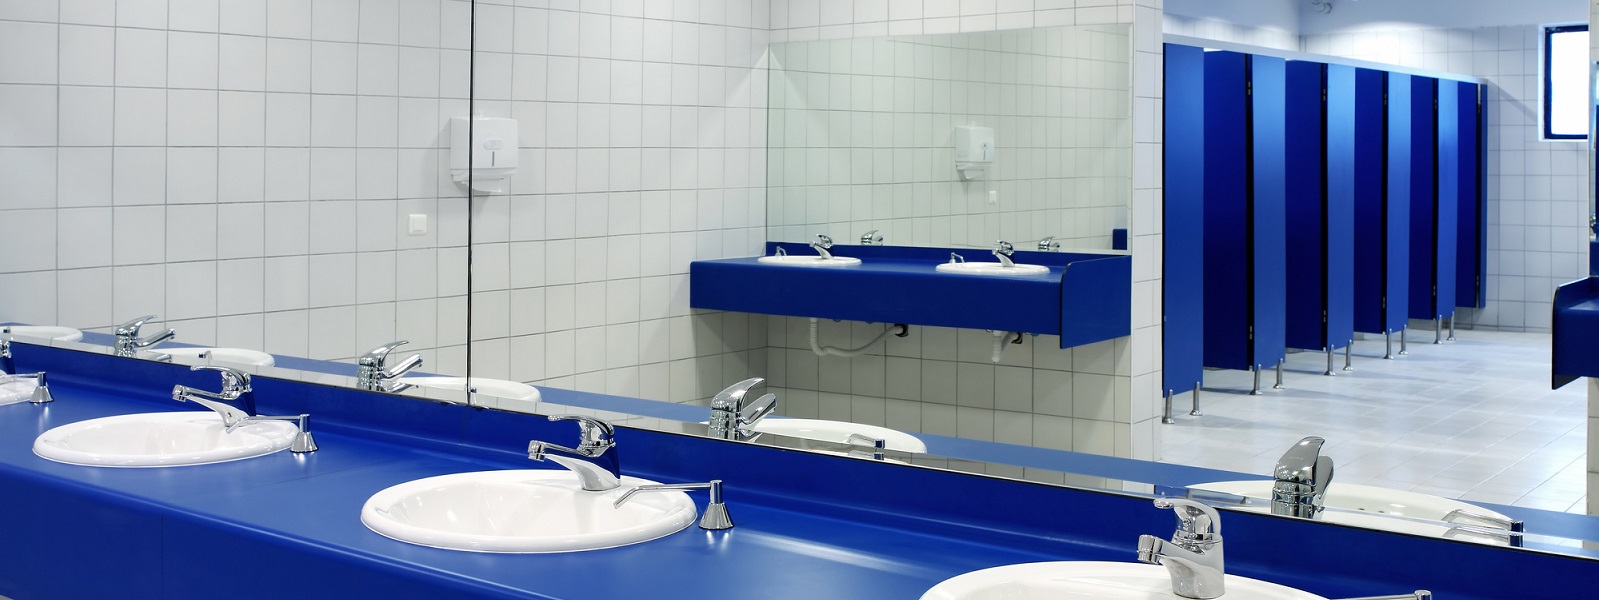 Row of sinks and cubicles in public toilet